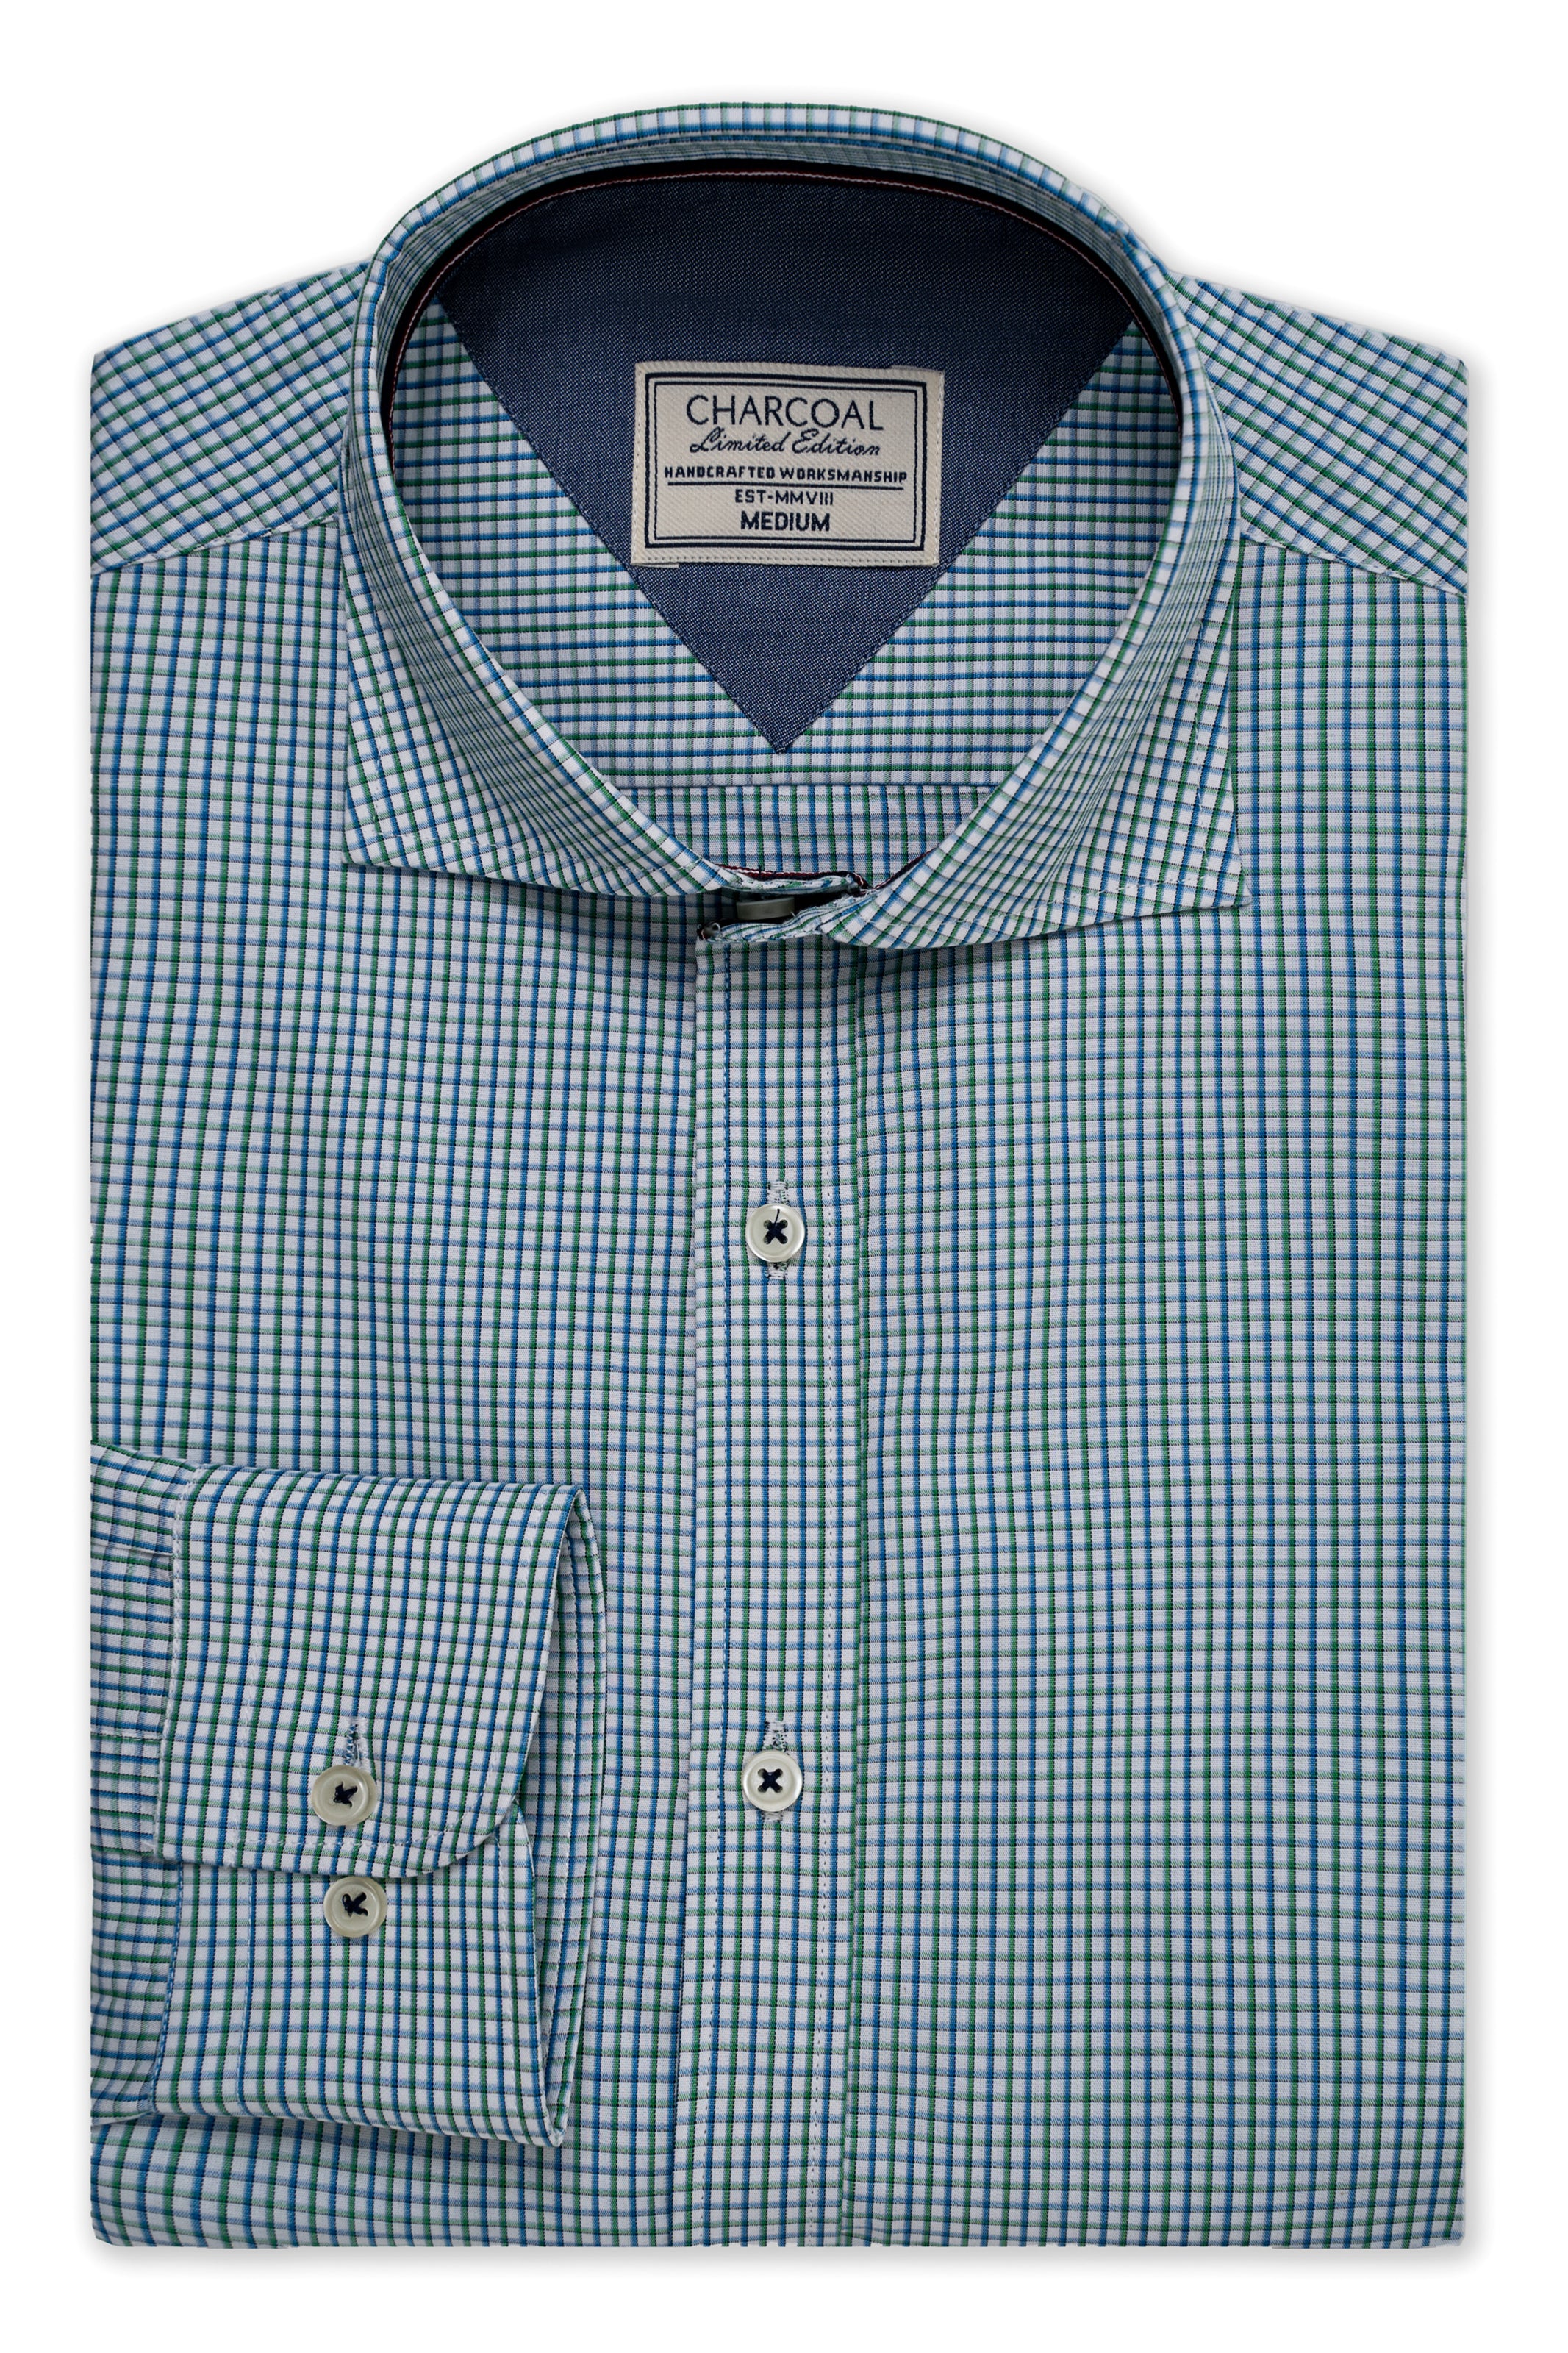 LIMITED EDITION SHIRTS BLUE GREEN CHECK